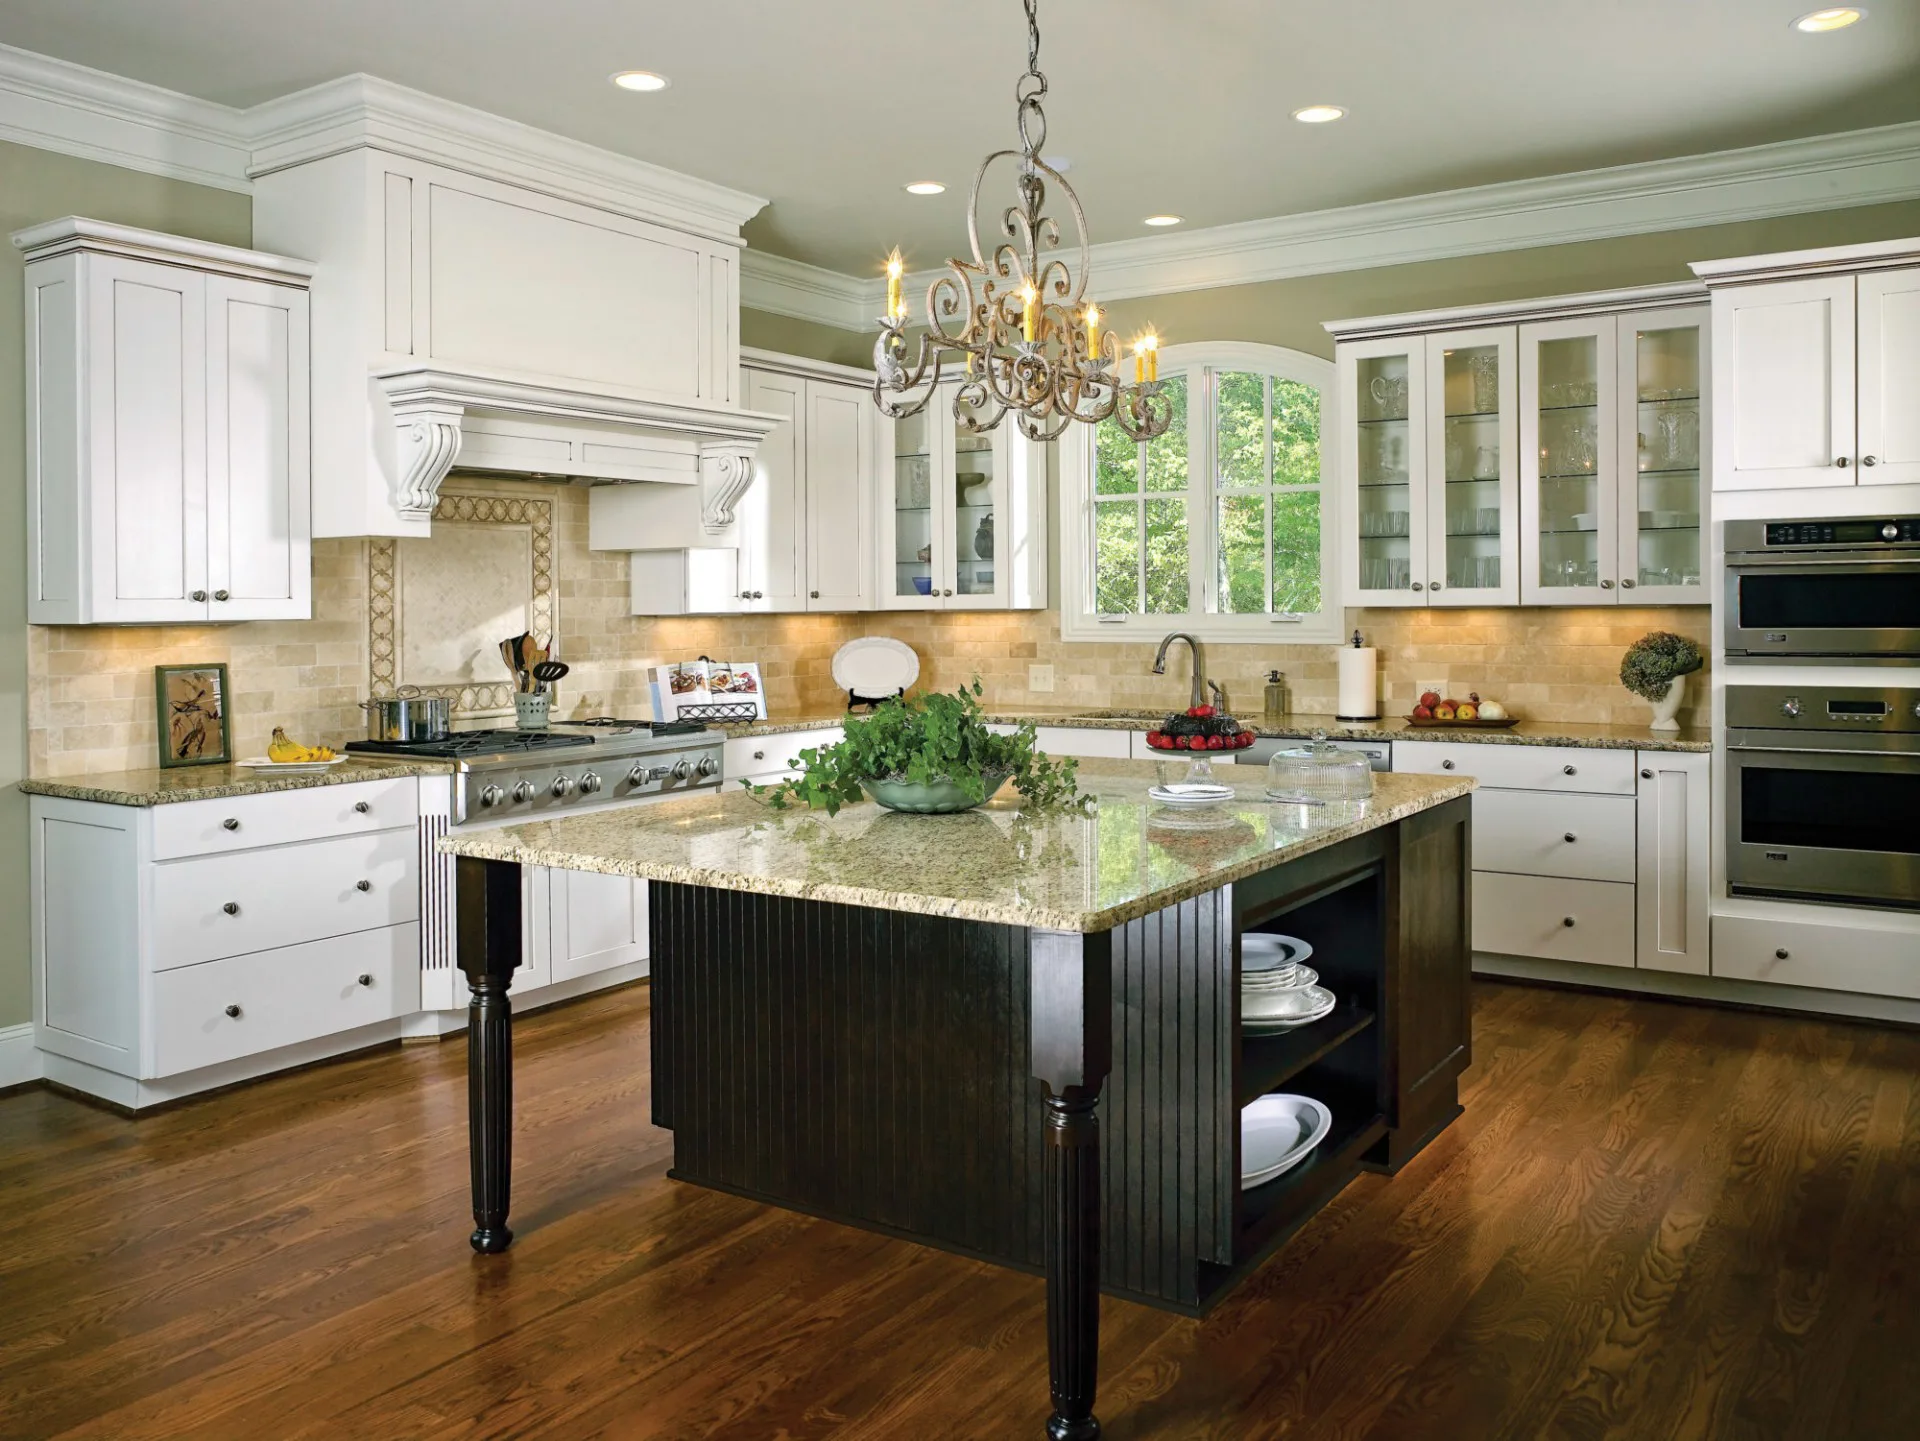 Kitchen Island Or Not The Pros And Cons Of Kitchen Islands